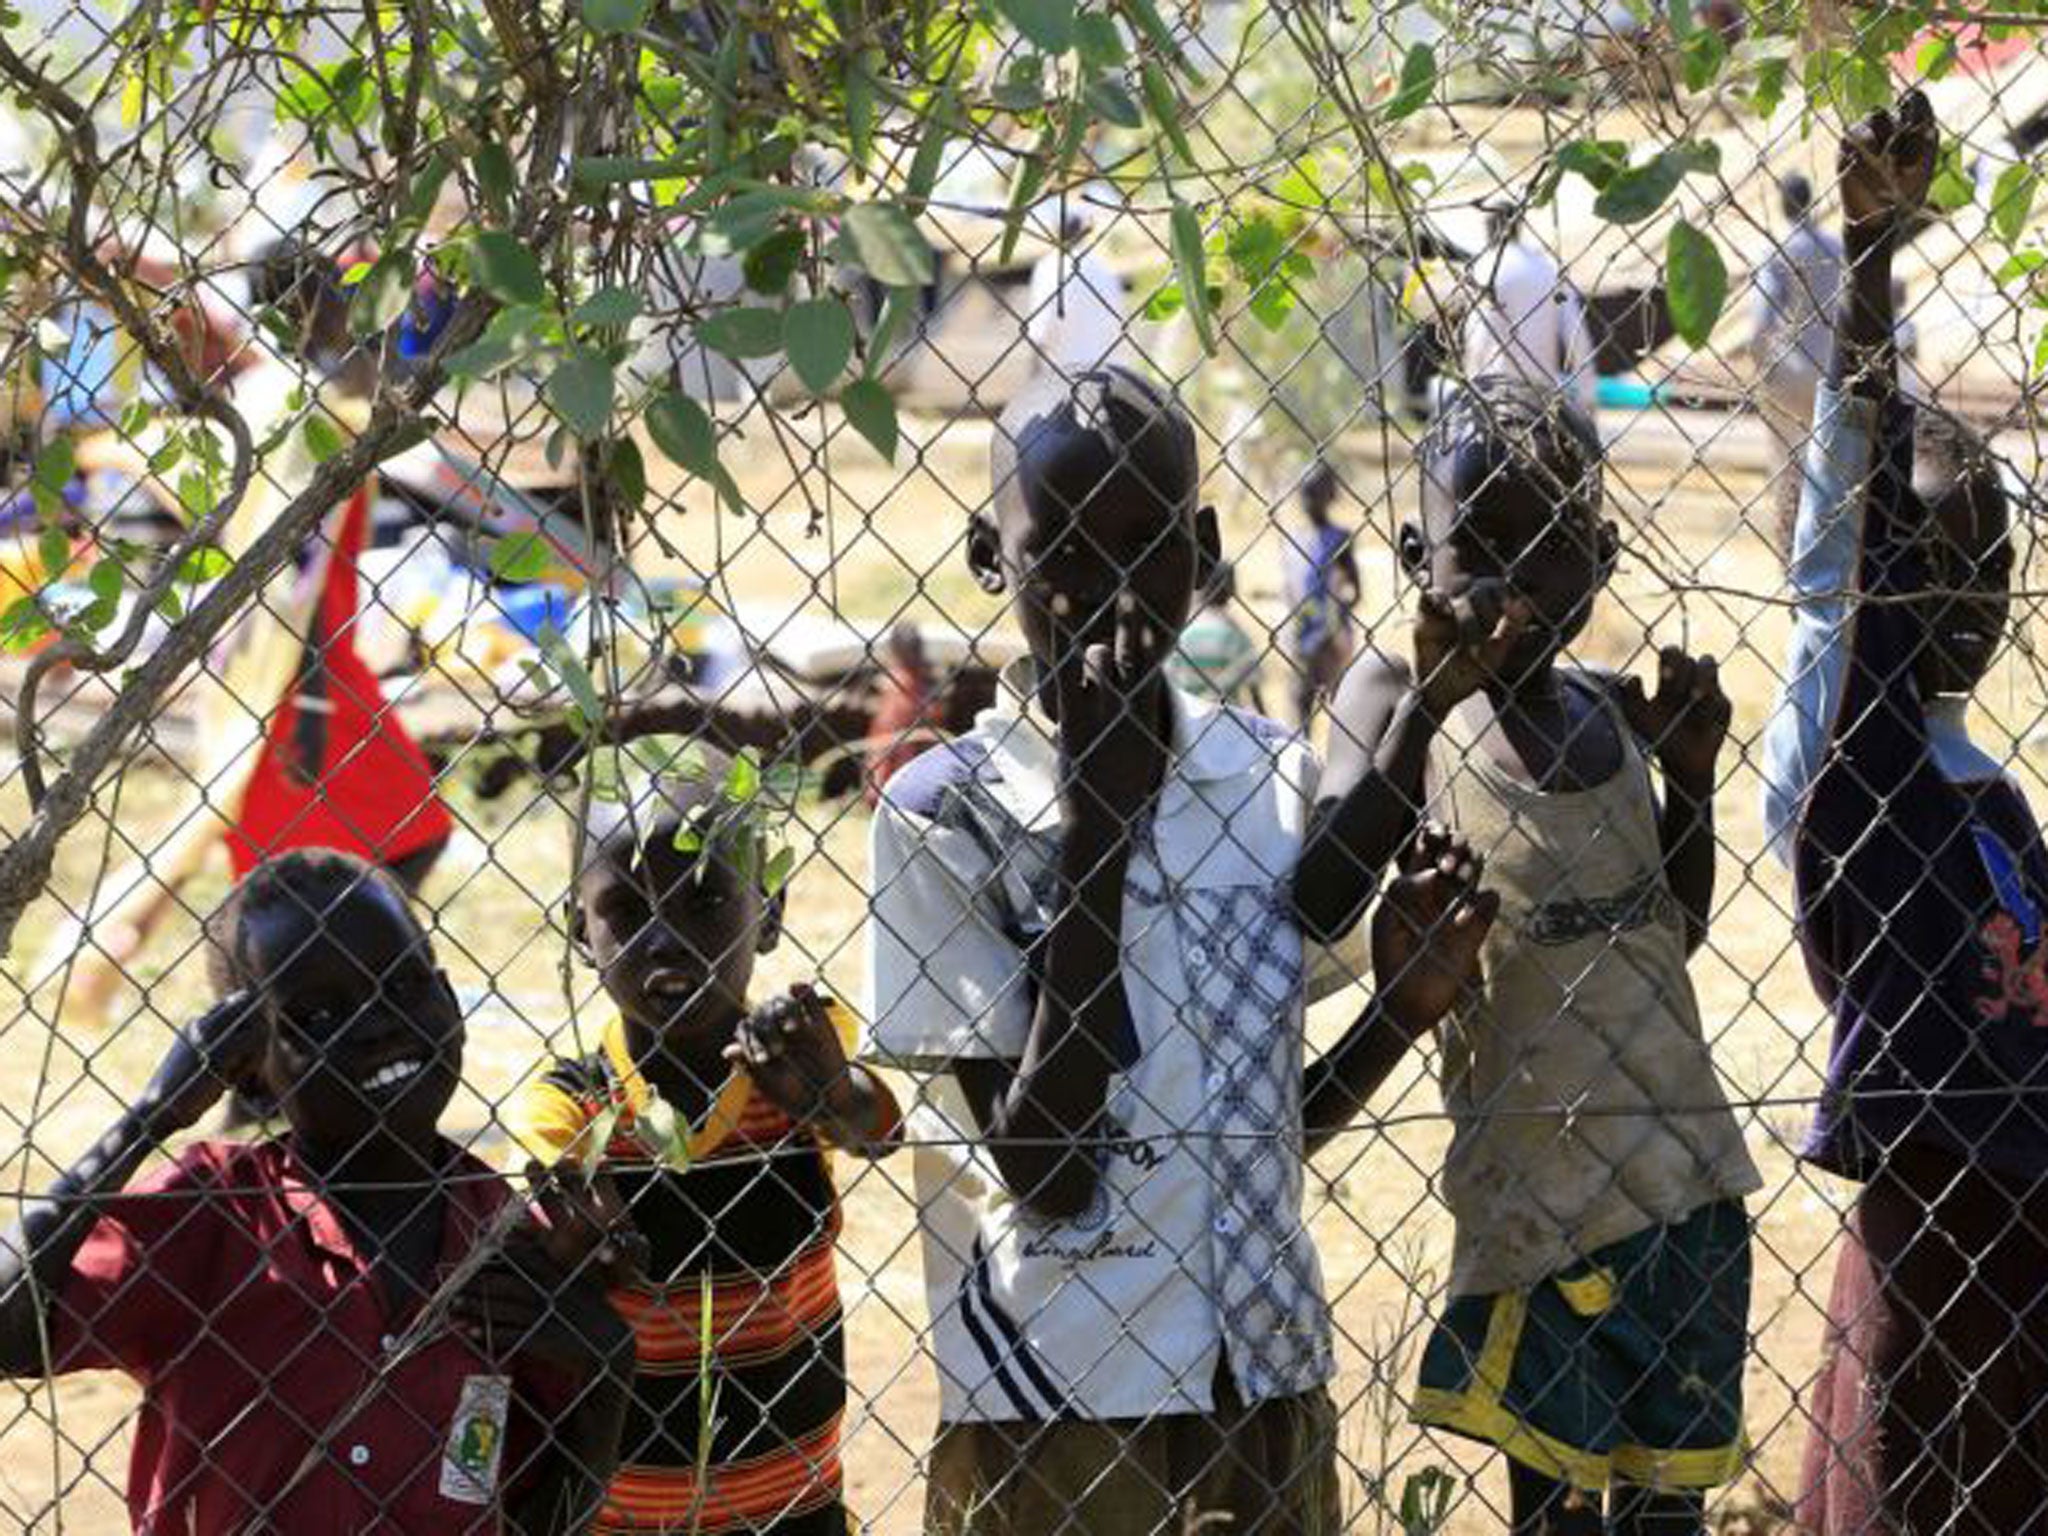 Children displaced by the fighting in South Sudan